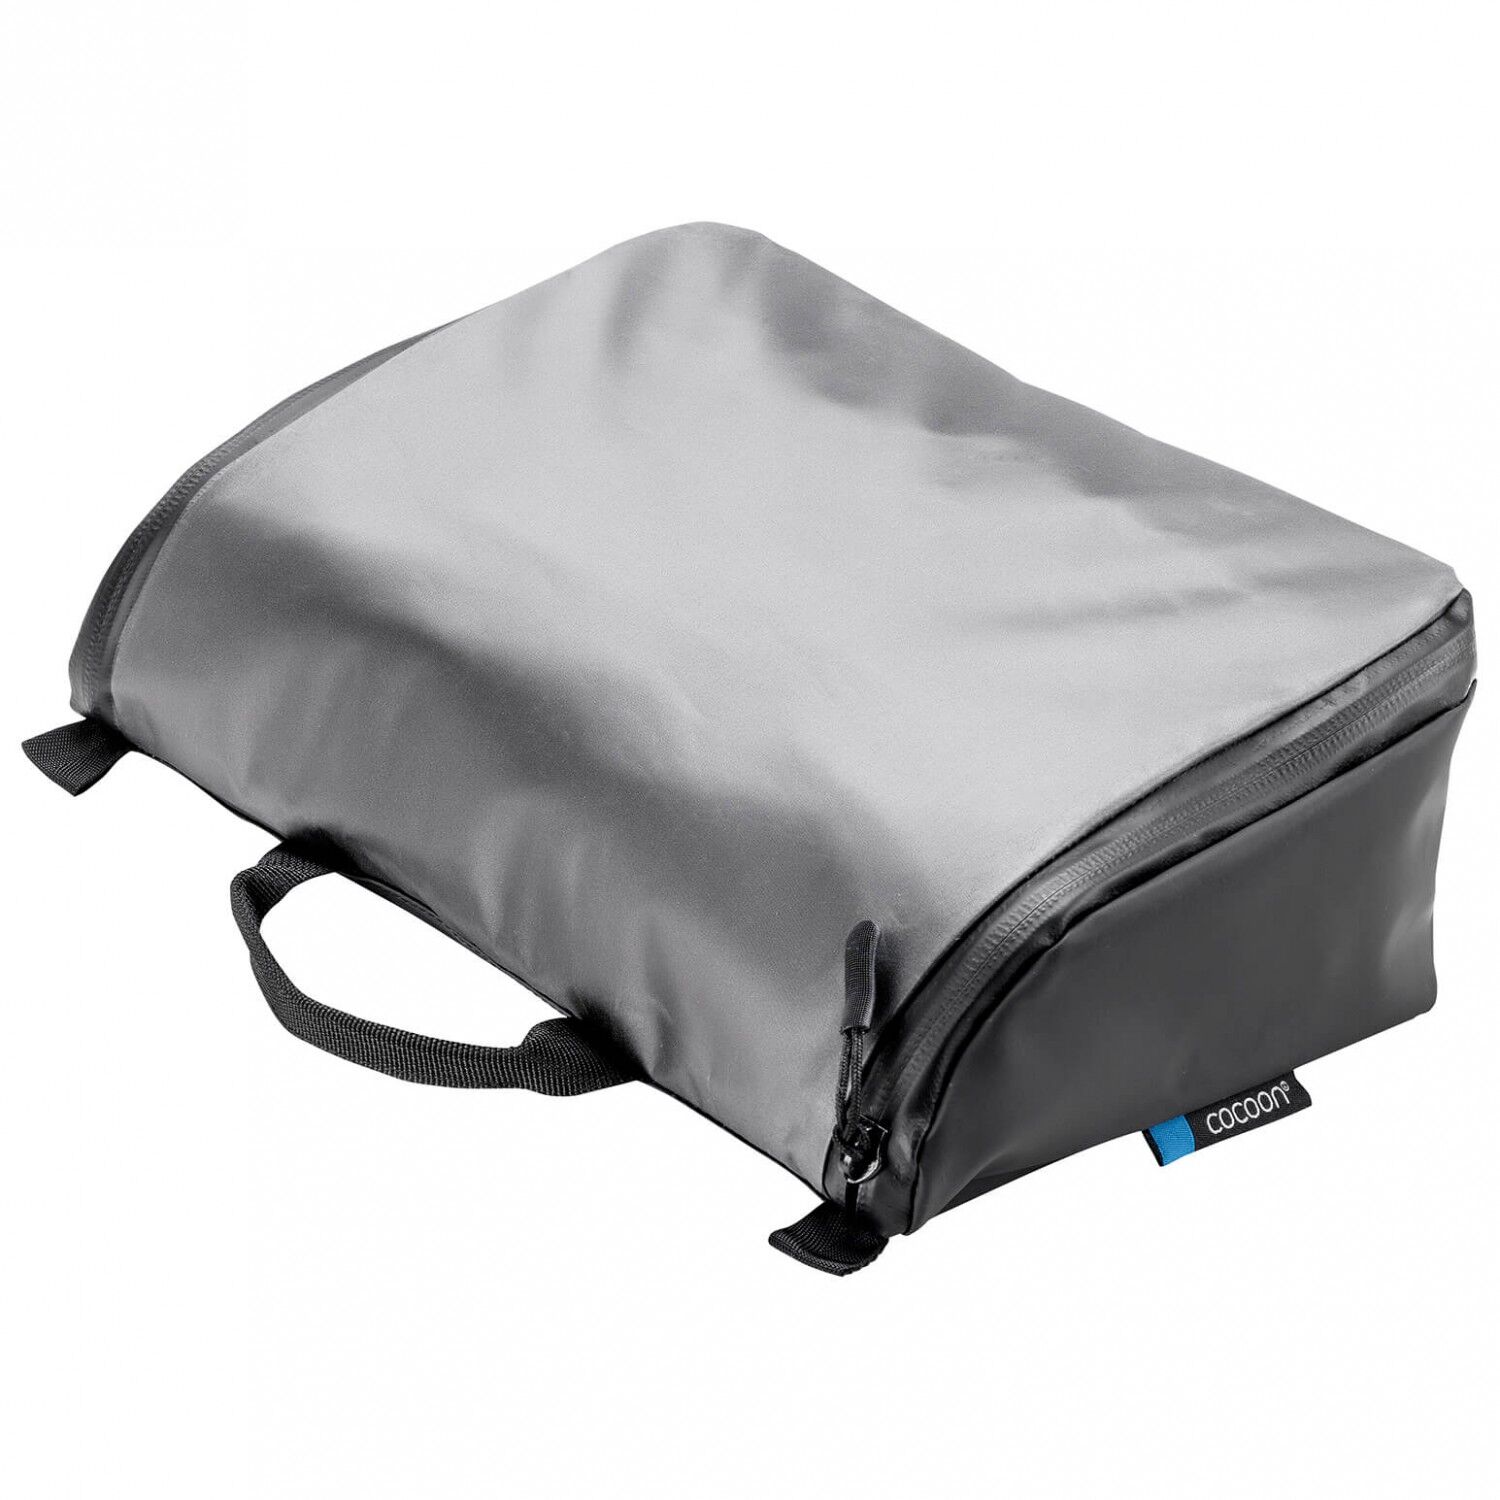 Cocoon Toiletry Kit Allrounder - Neceseres